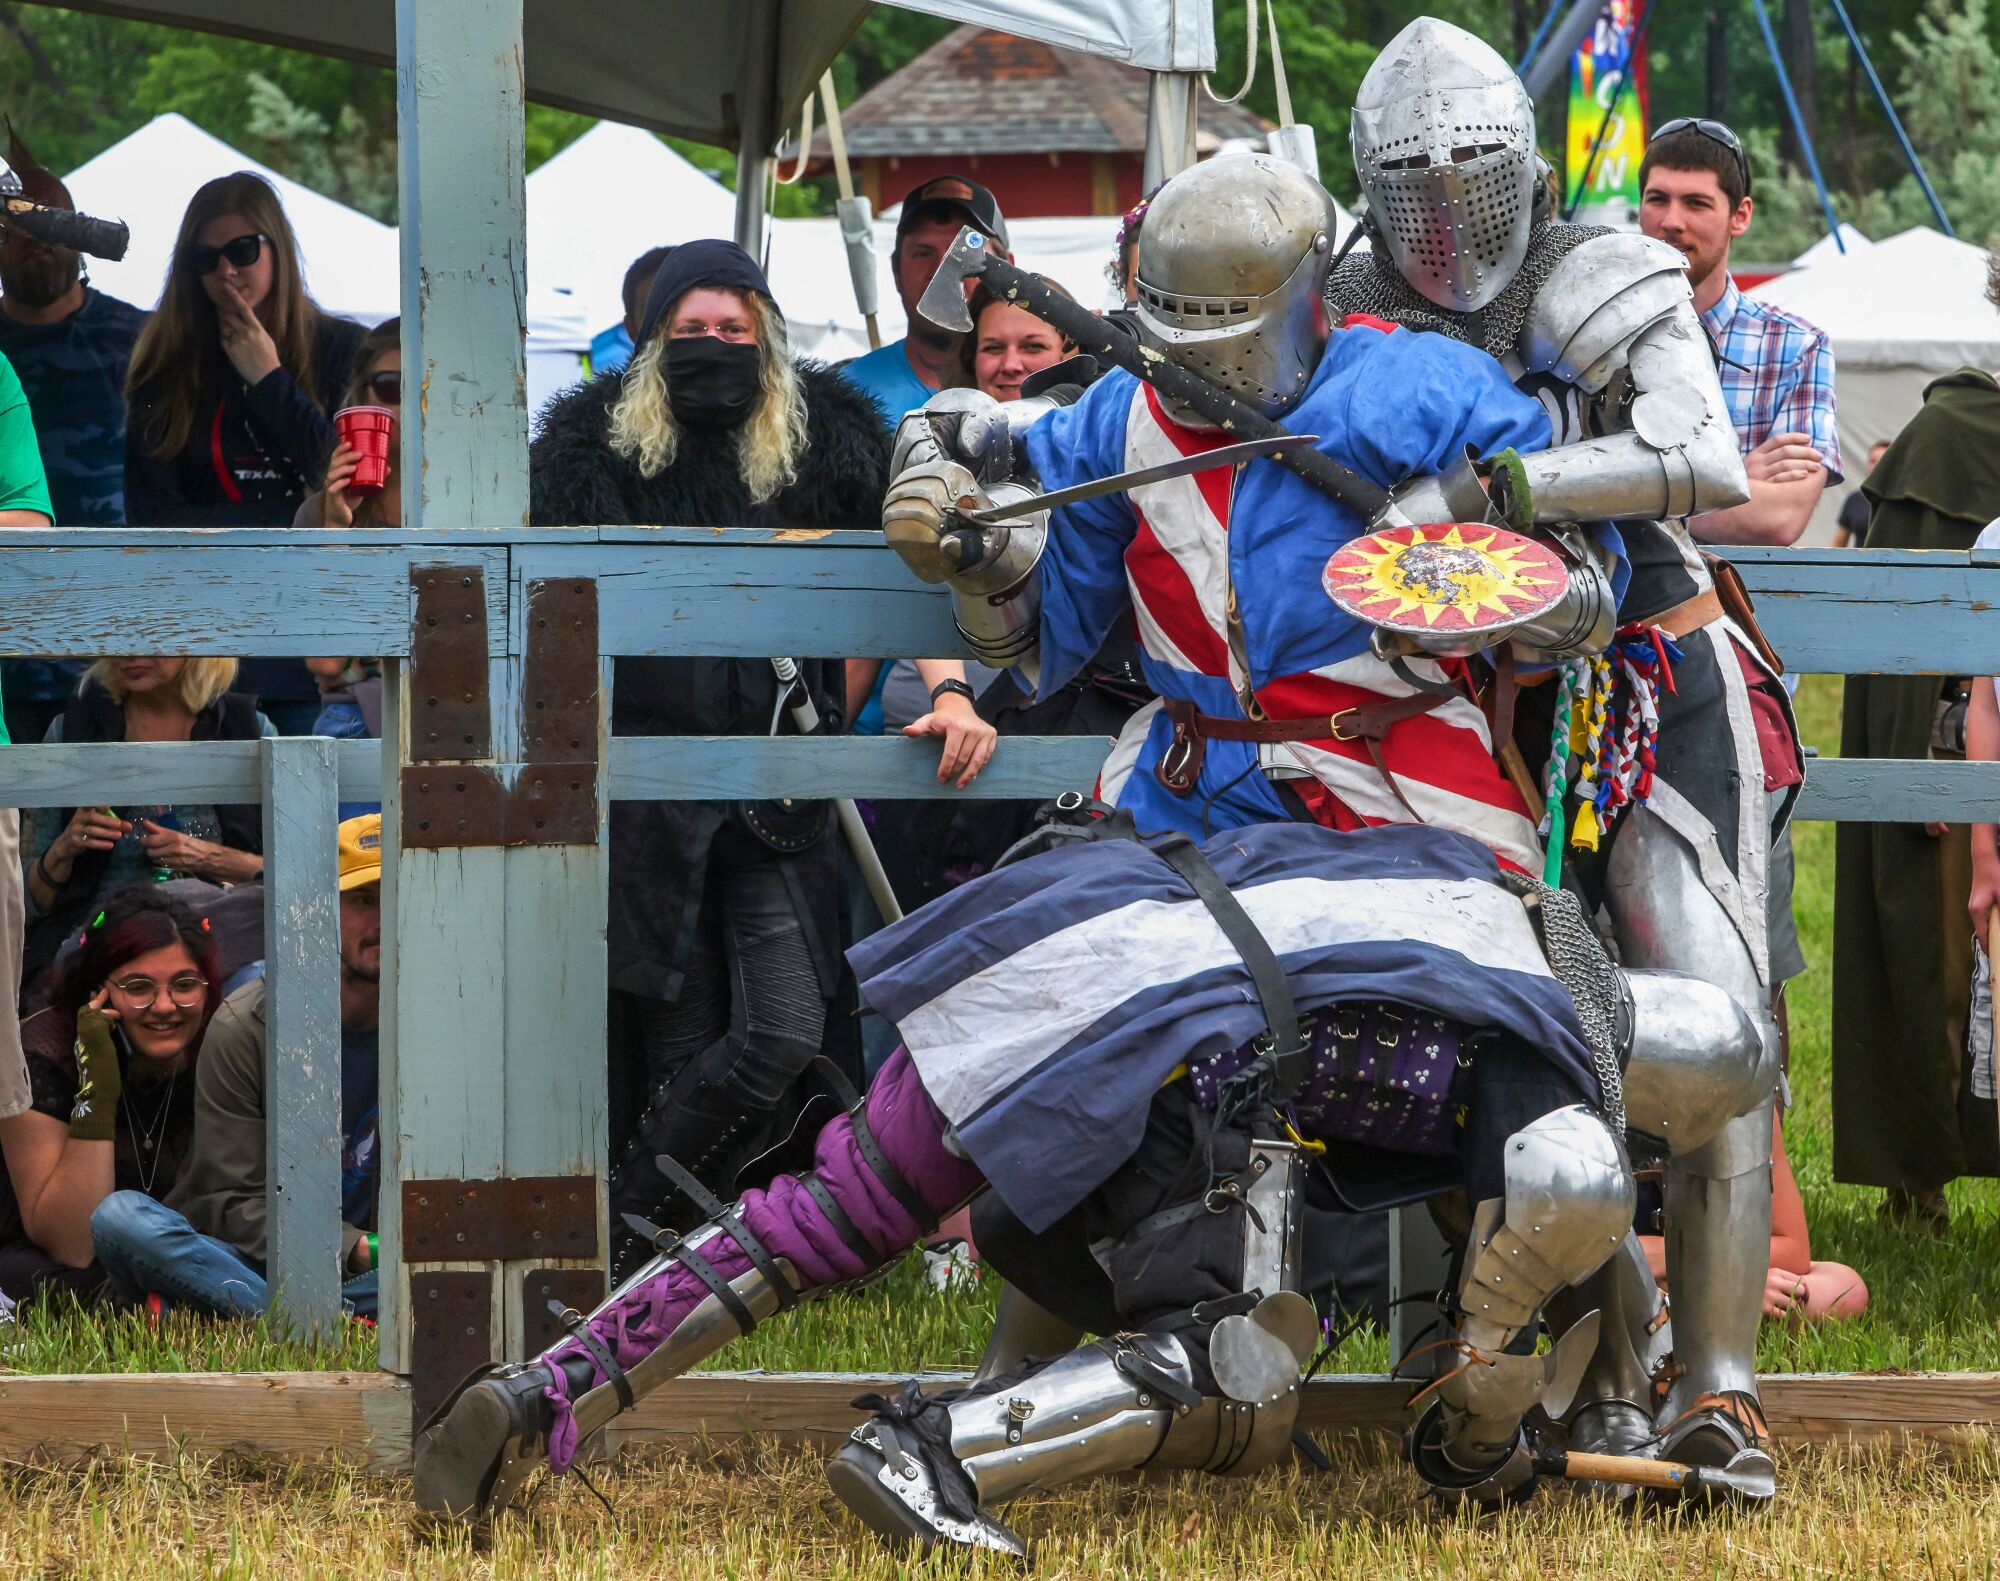 Three fighters in medieval-style armor try to bring one another down. 